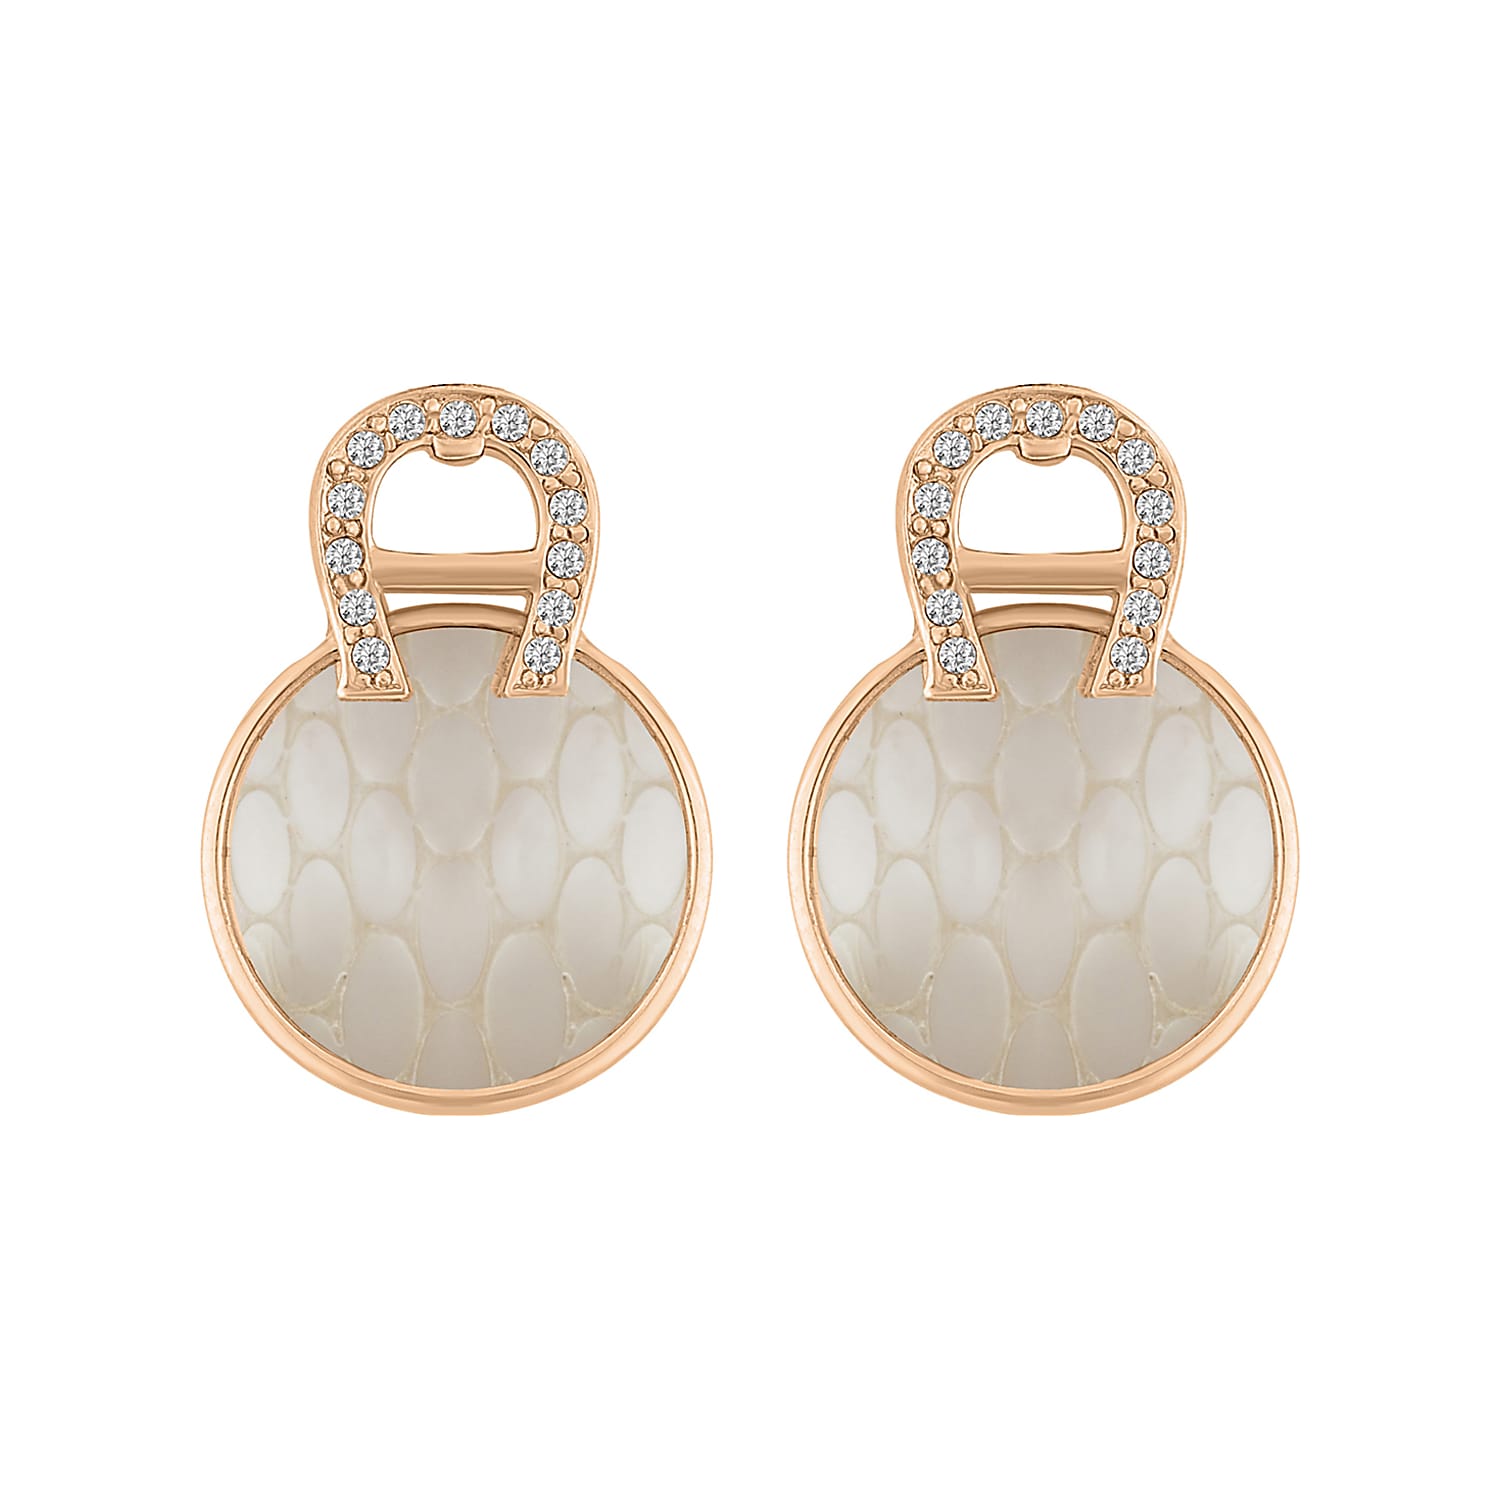 A-Logo Earrings with MOP Rosegold